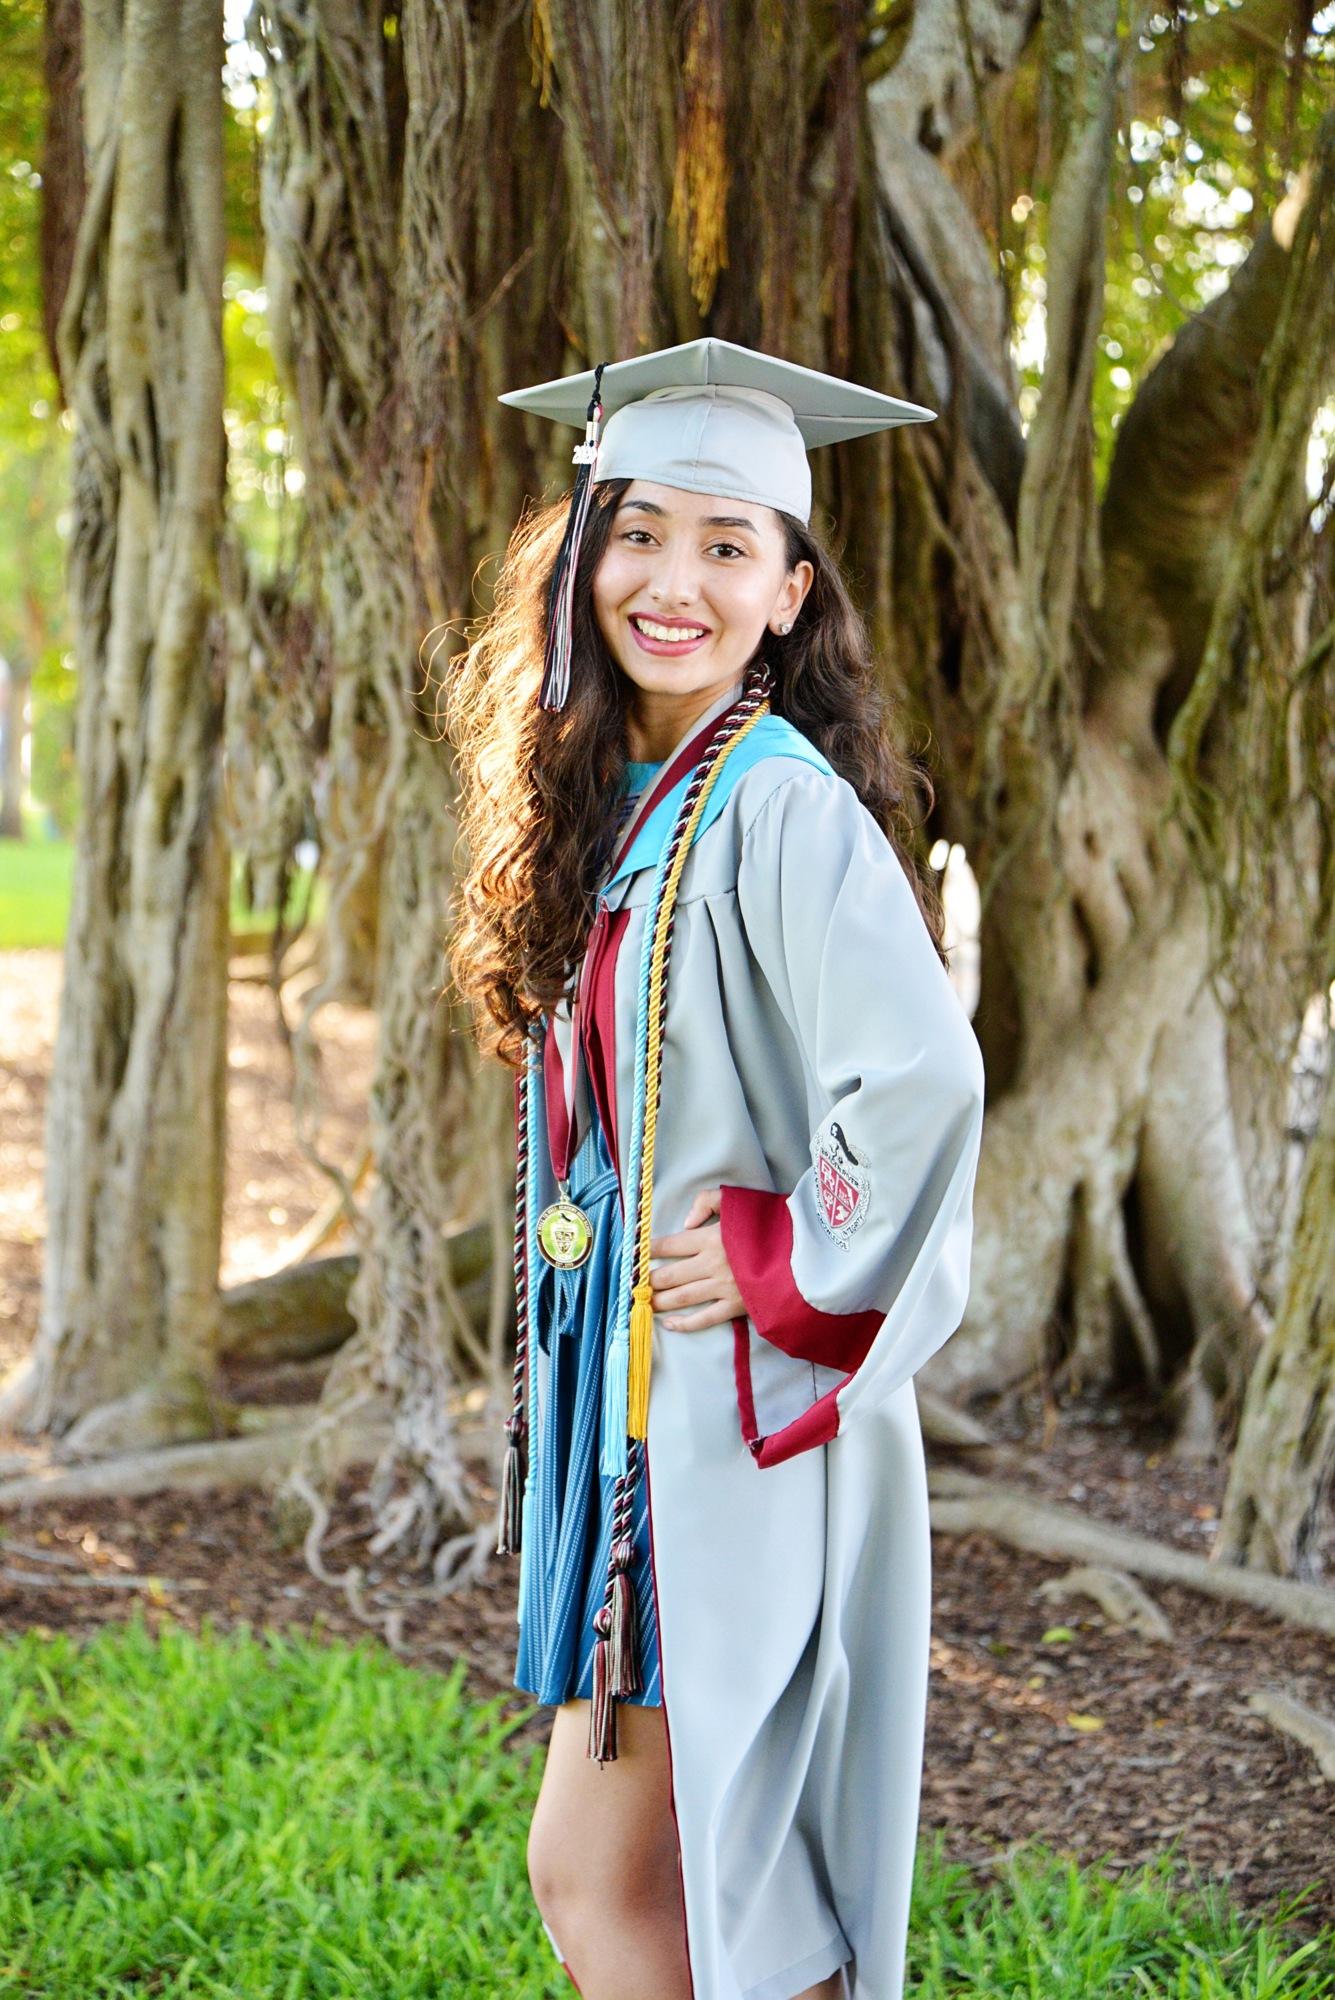 Isabella Macias, a graduating senior at Braden River High School, wants to remind her classmates of their resilience and strength during the pandemic. Courtesy photo.